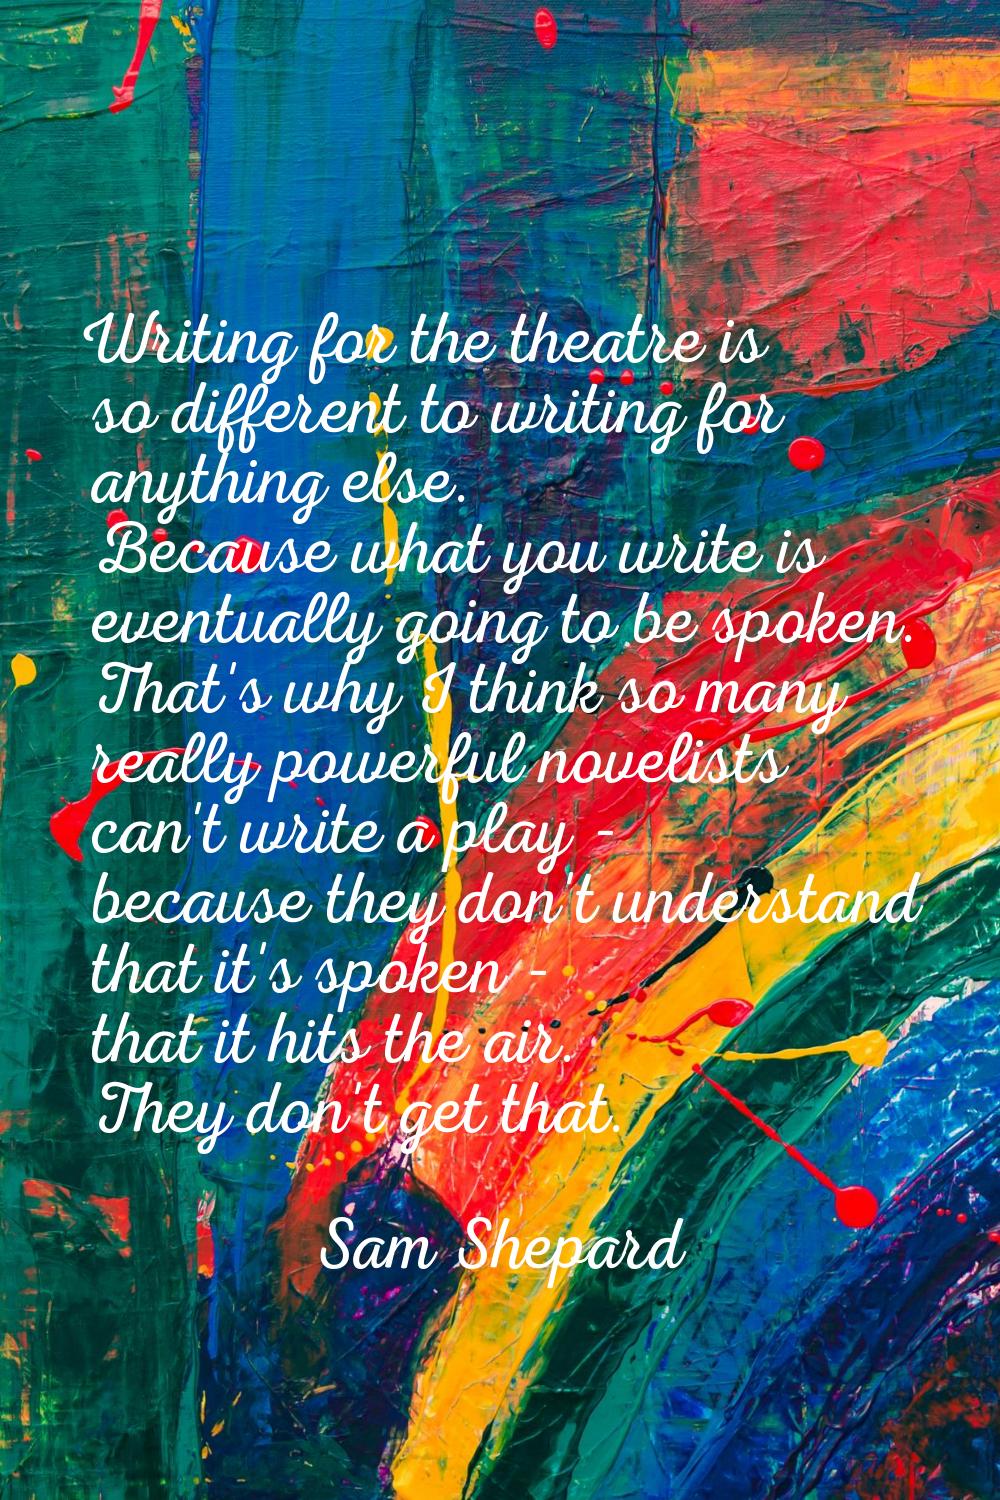 Writing for the theatre is so different to writing for anything else. Because what you write is eve